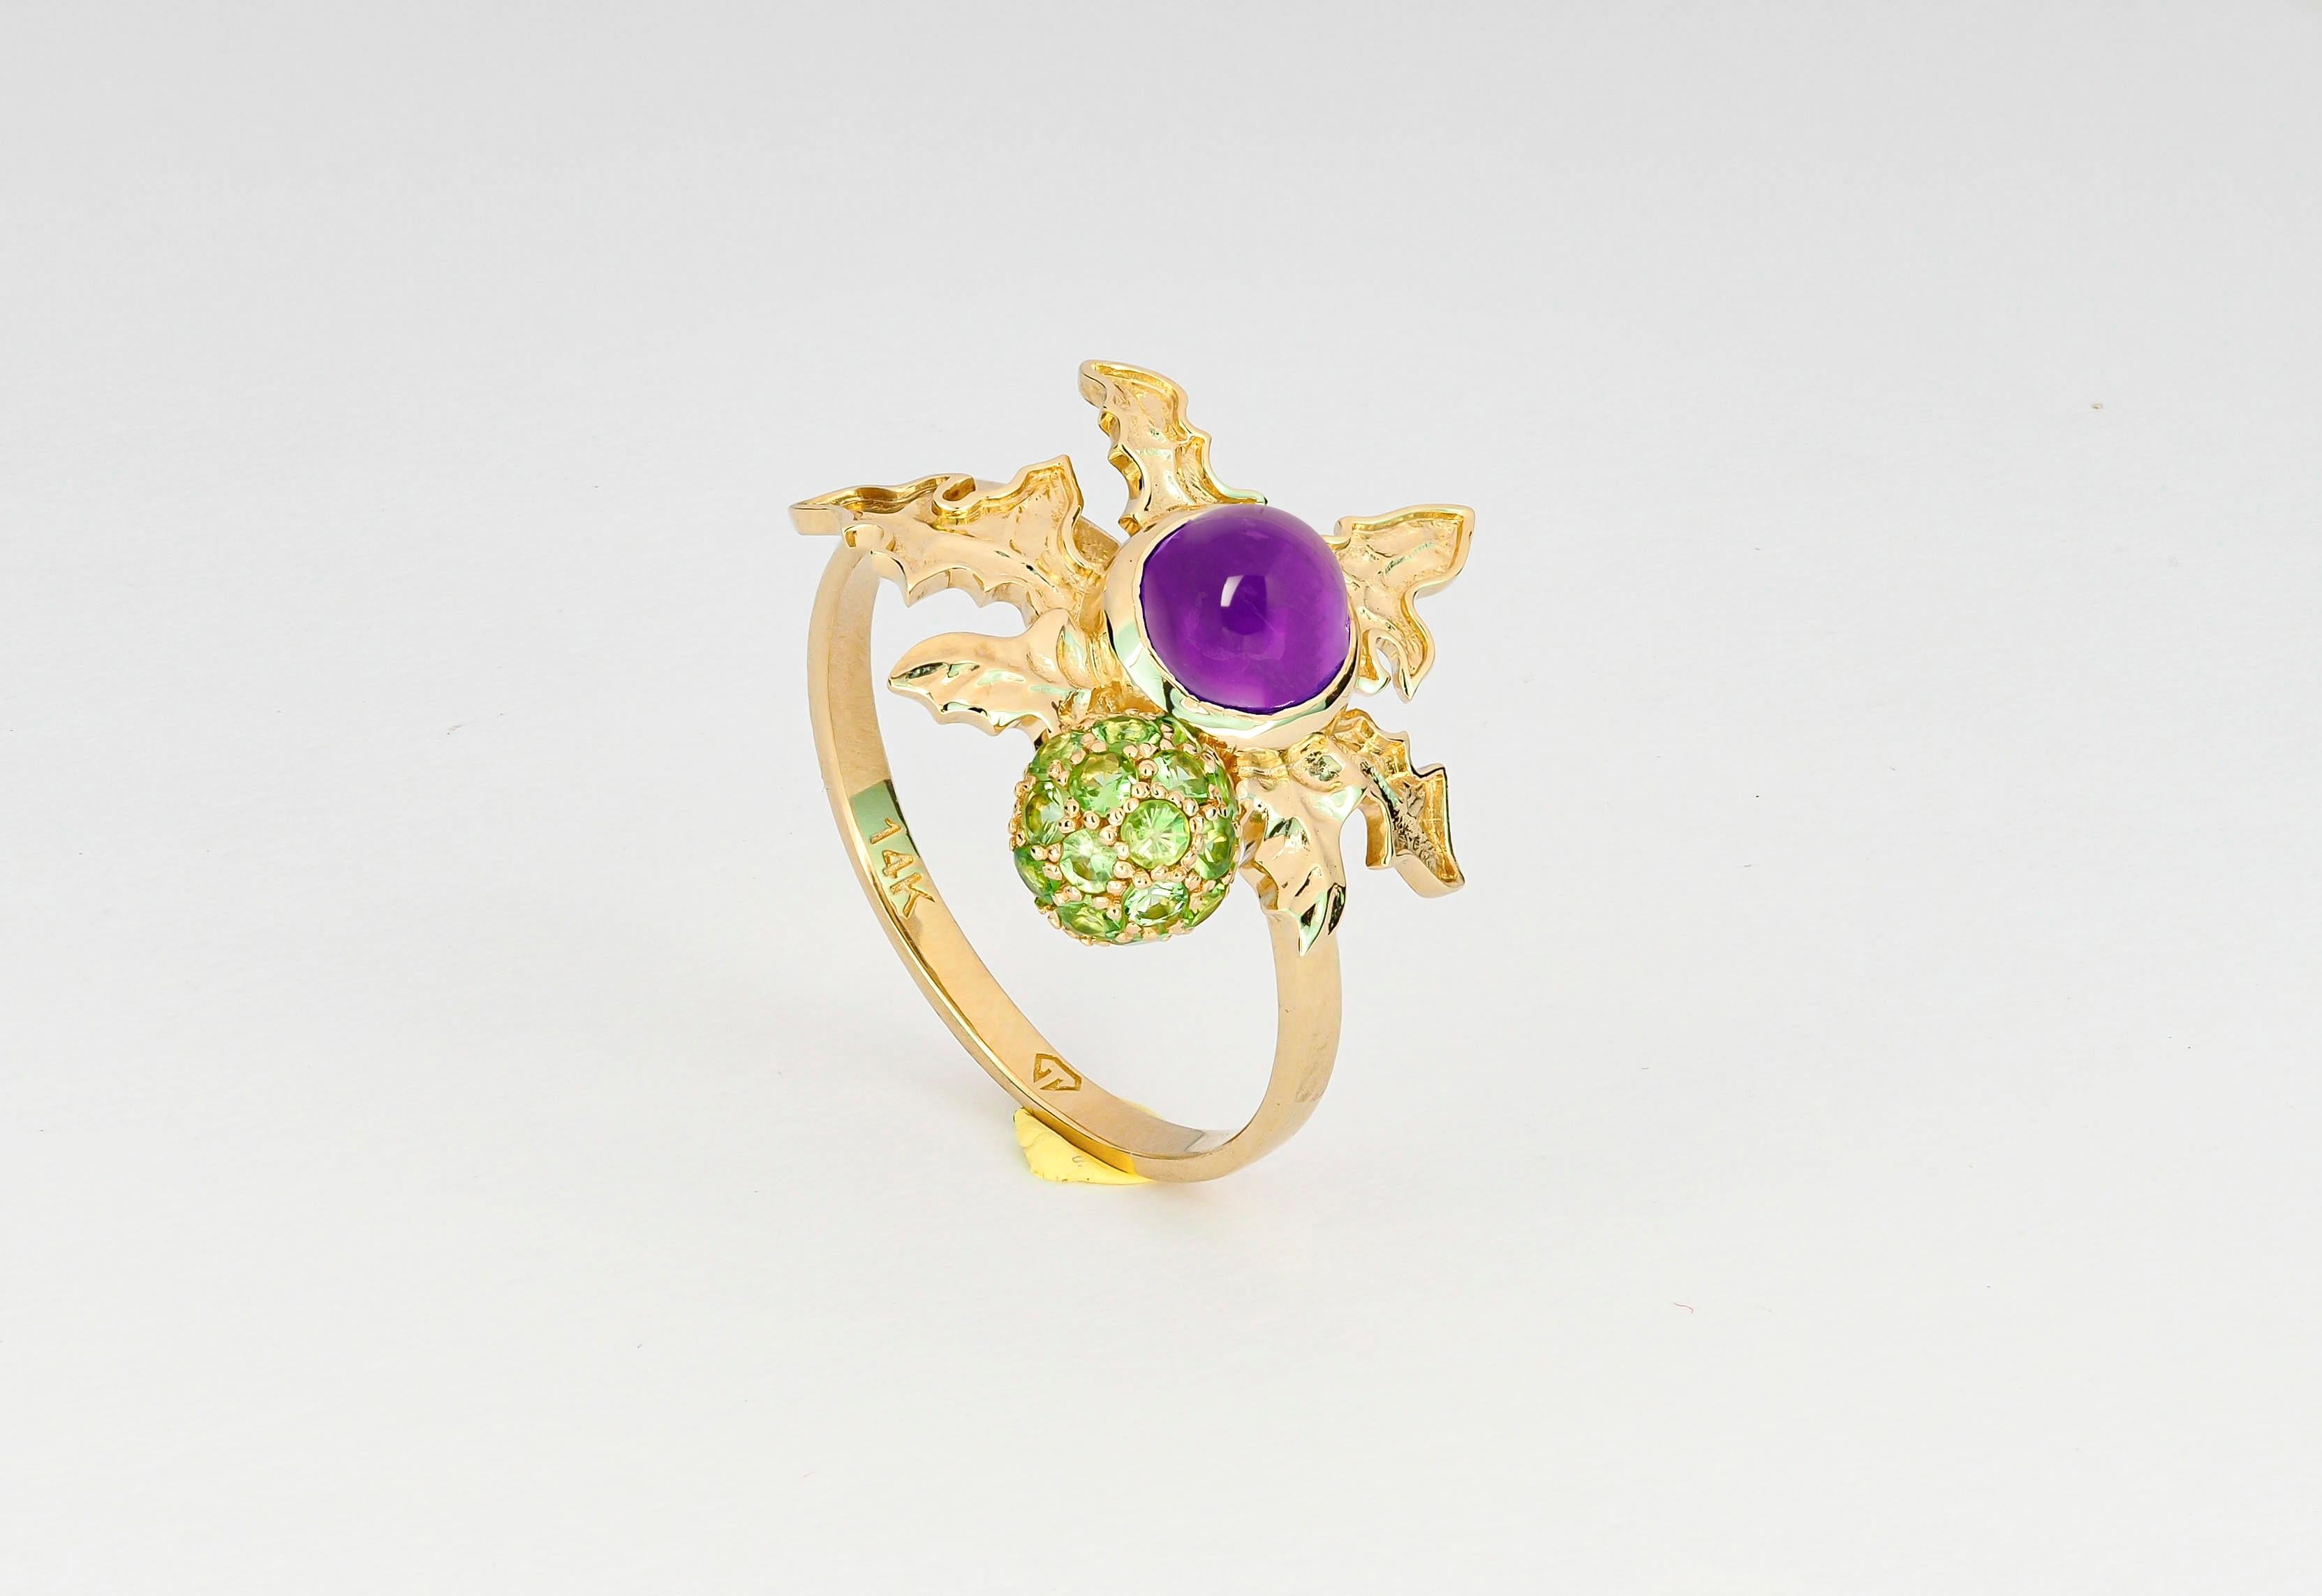 Thistle ring with amethyst in 14k gold. 
Thistle gold Ring. Flower gold ring. Amethyst and peridot ring. Leaf gold Ring. Flower gold ring. 

Metal: 14k gold
Weight: 2.85 g. depends from size

Set with amethyst, color - purple
cabochon cut, 1,2 ct.